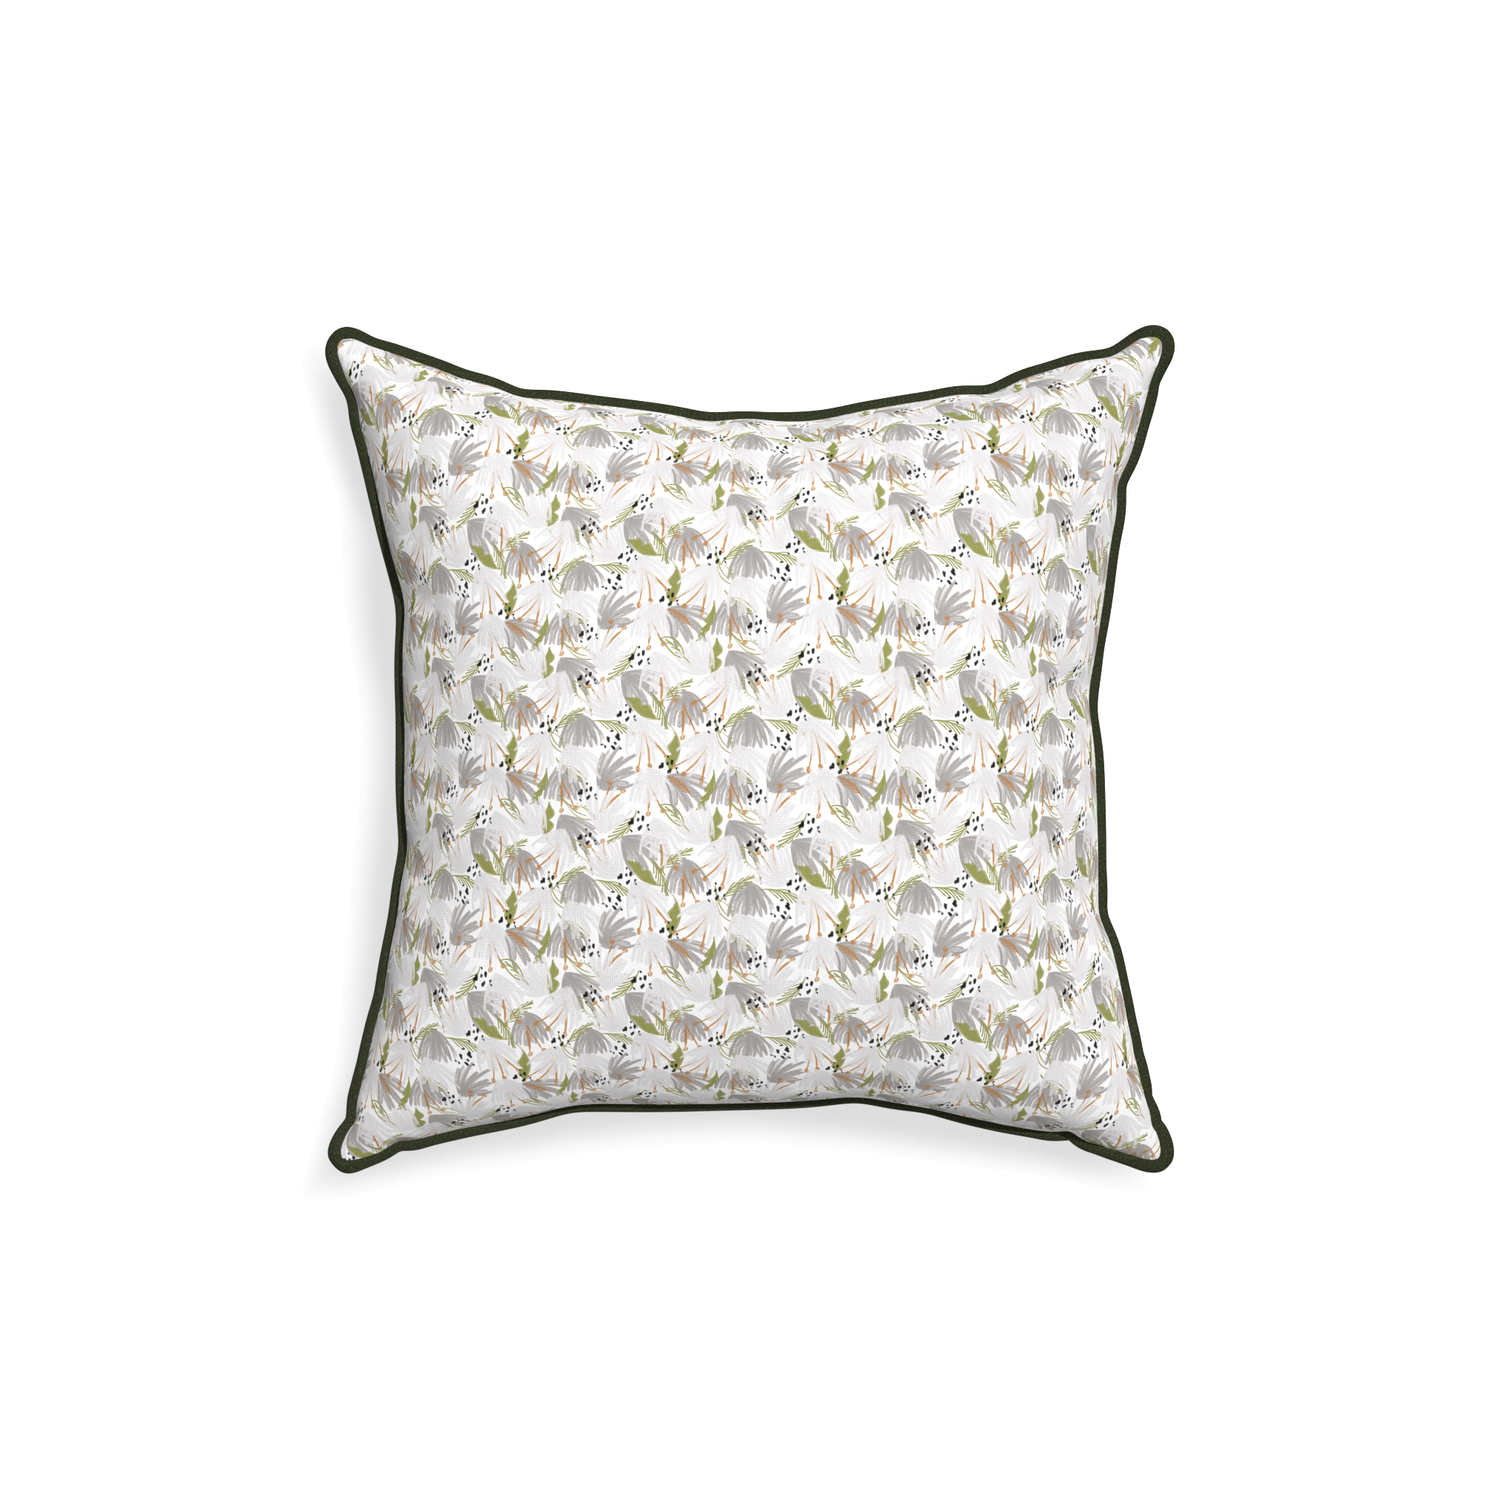 18-square eden grey custom grey floralpillow with f piping on white background